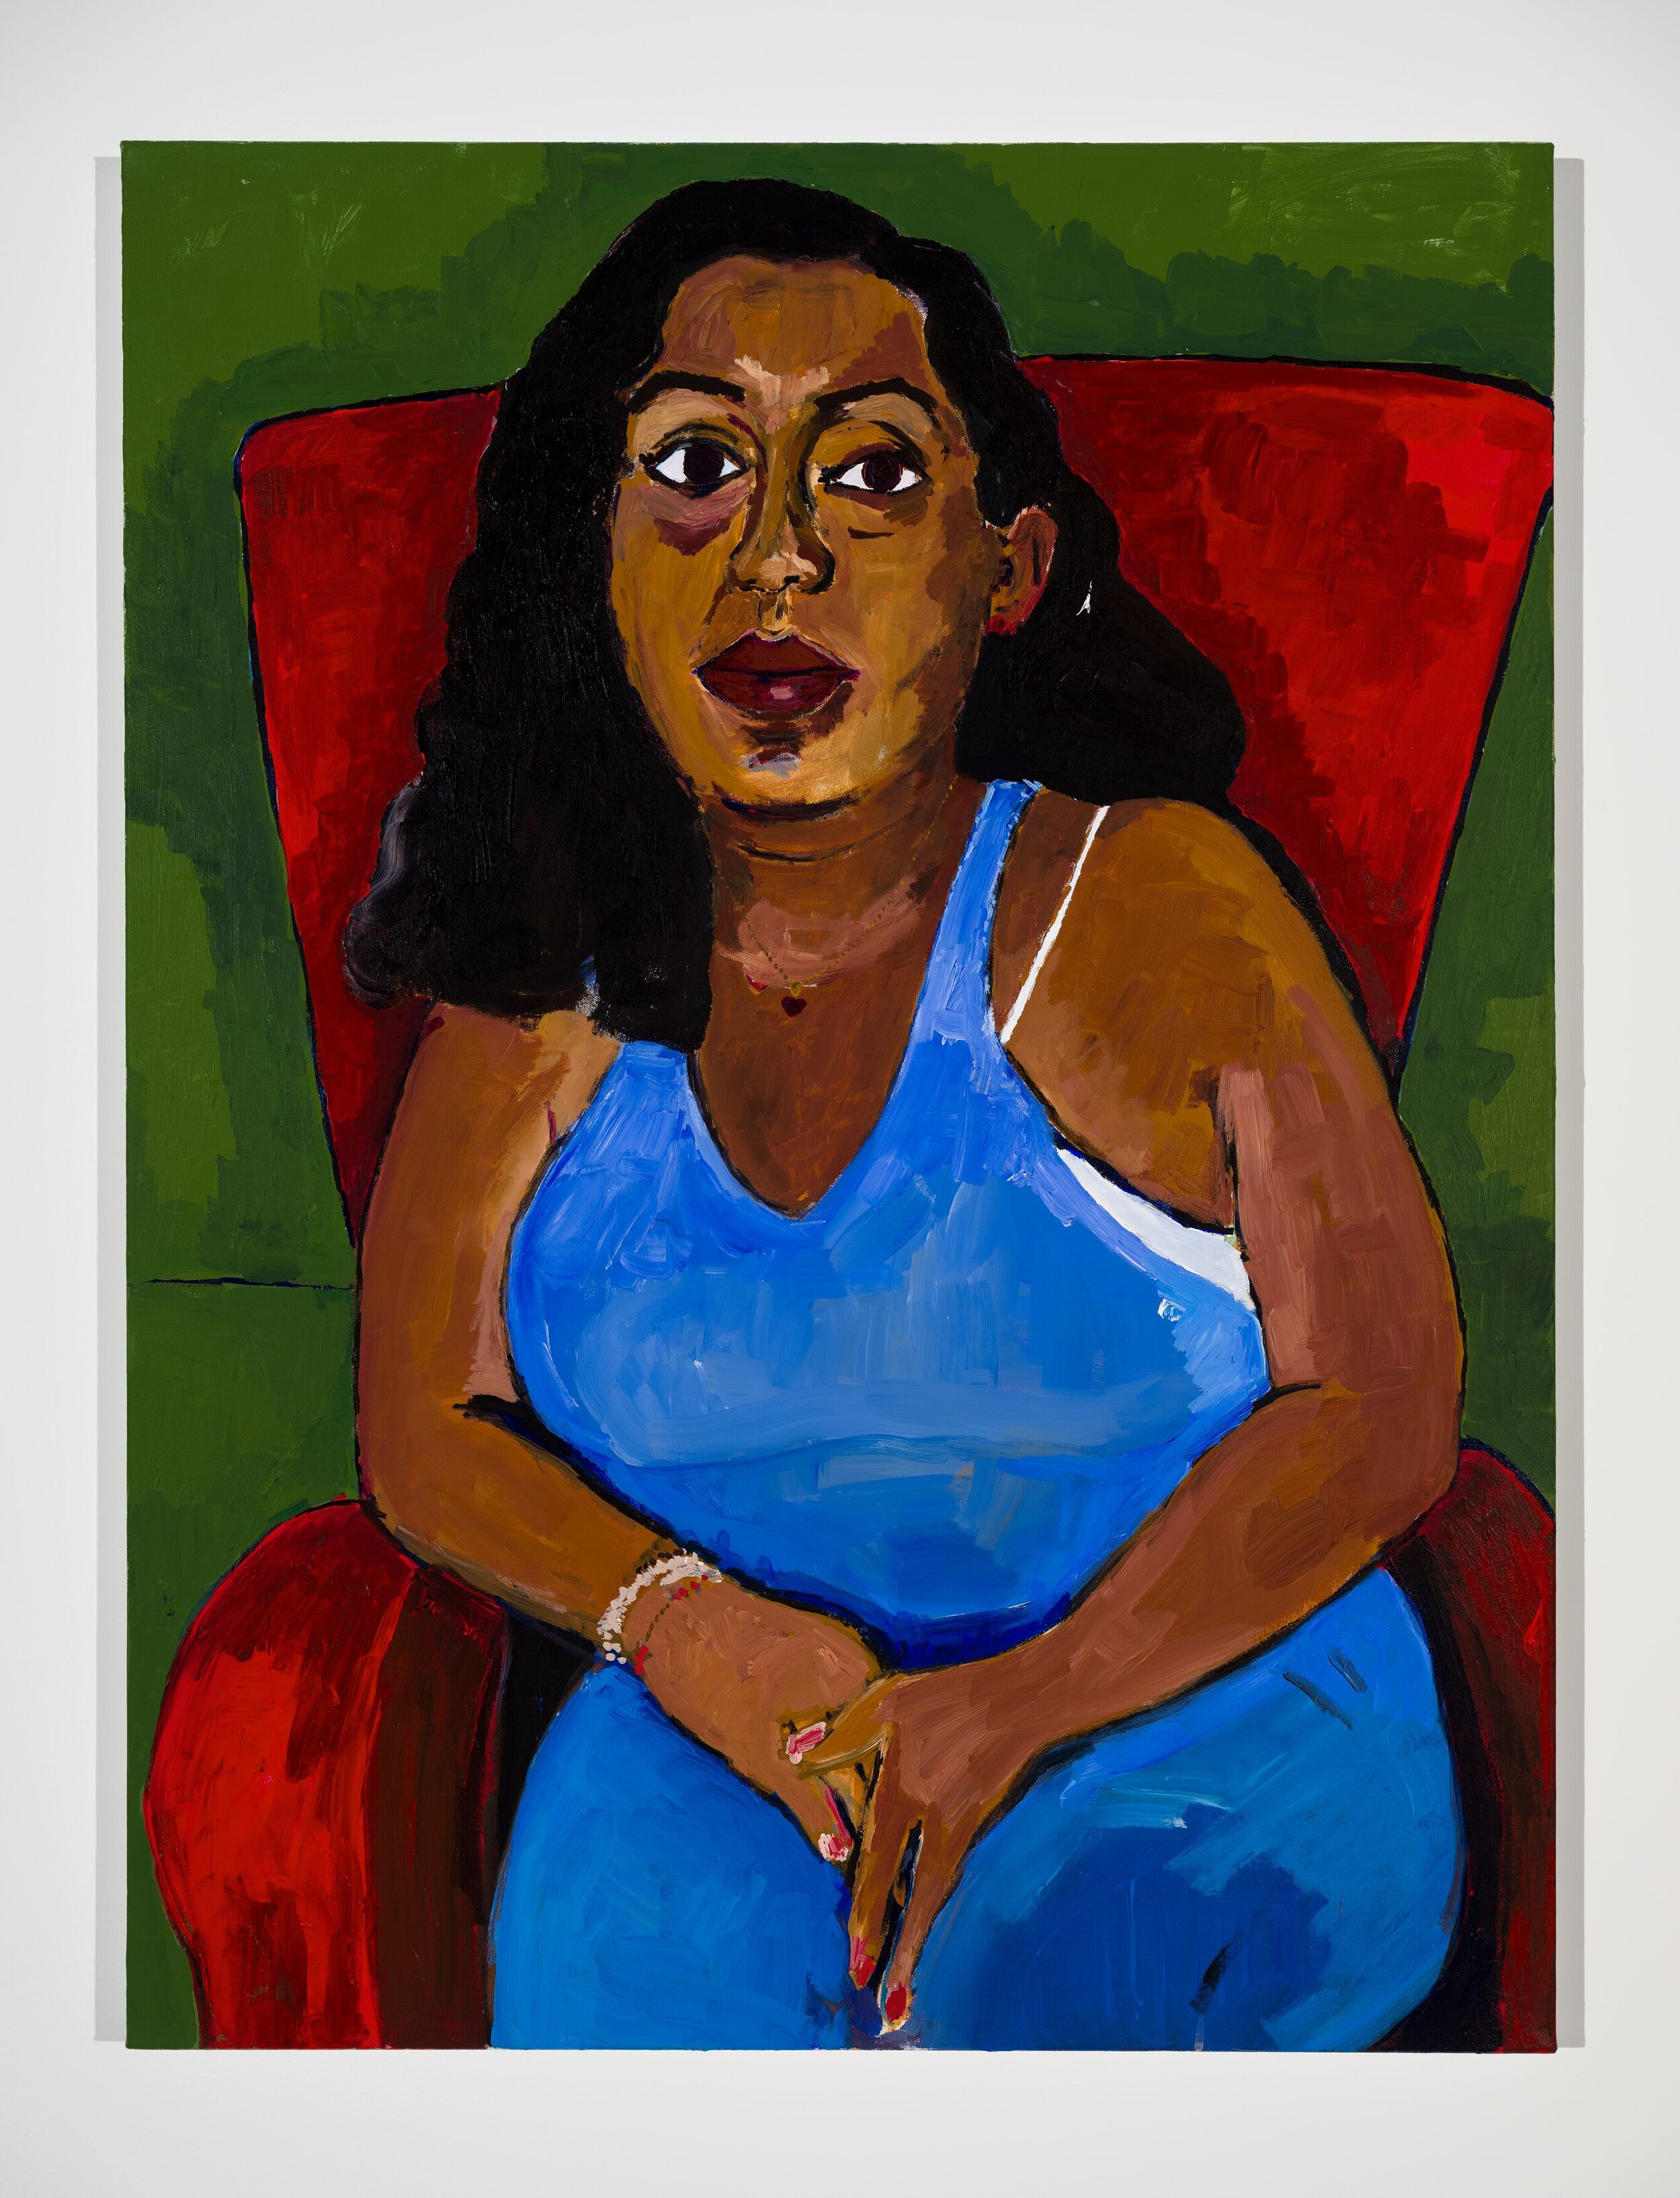  Henry Taylor Portrait of my cousin GF: Dana Gallegos 2020 Acrylic on canvas 121.9 x 91.4 x 3.8 cm / 48 x 36 x 1 1/2 in Photo: Fredrik Nilsen © Henry Taylor Courtesy the artist and Hauser &amp; Wirth 